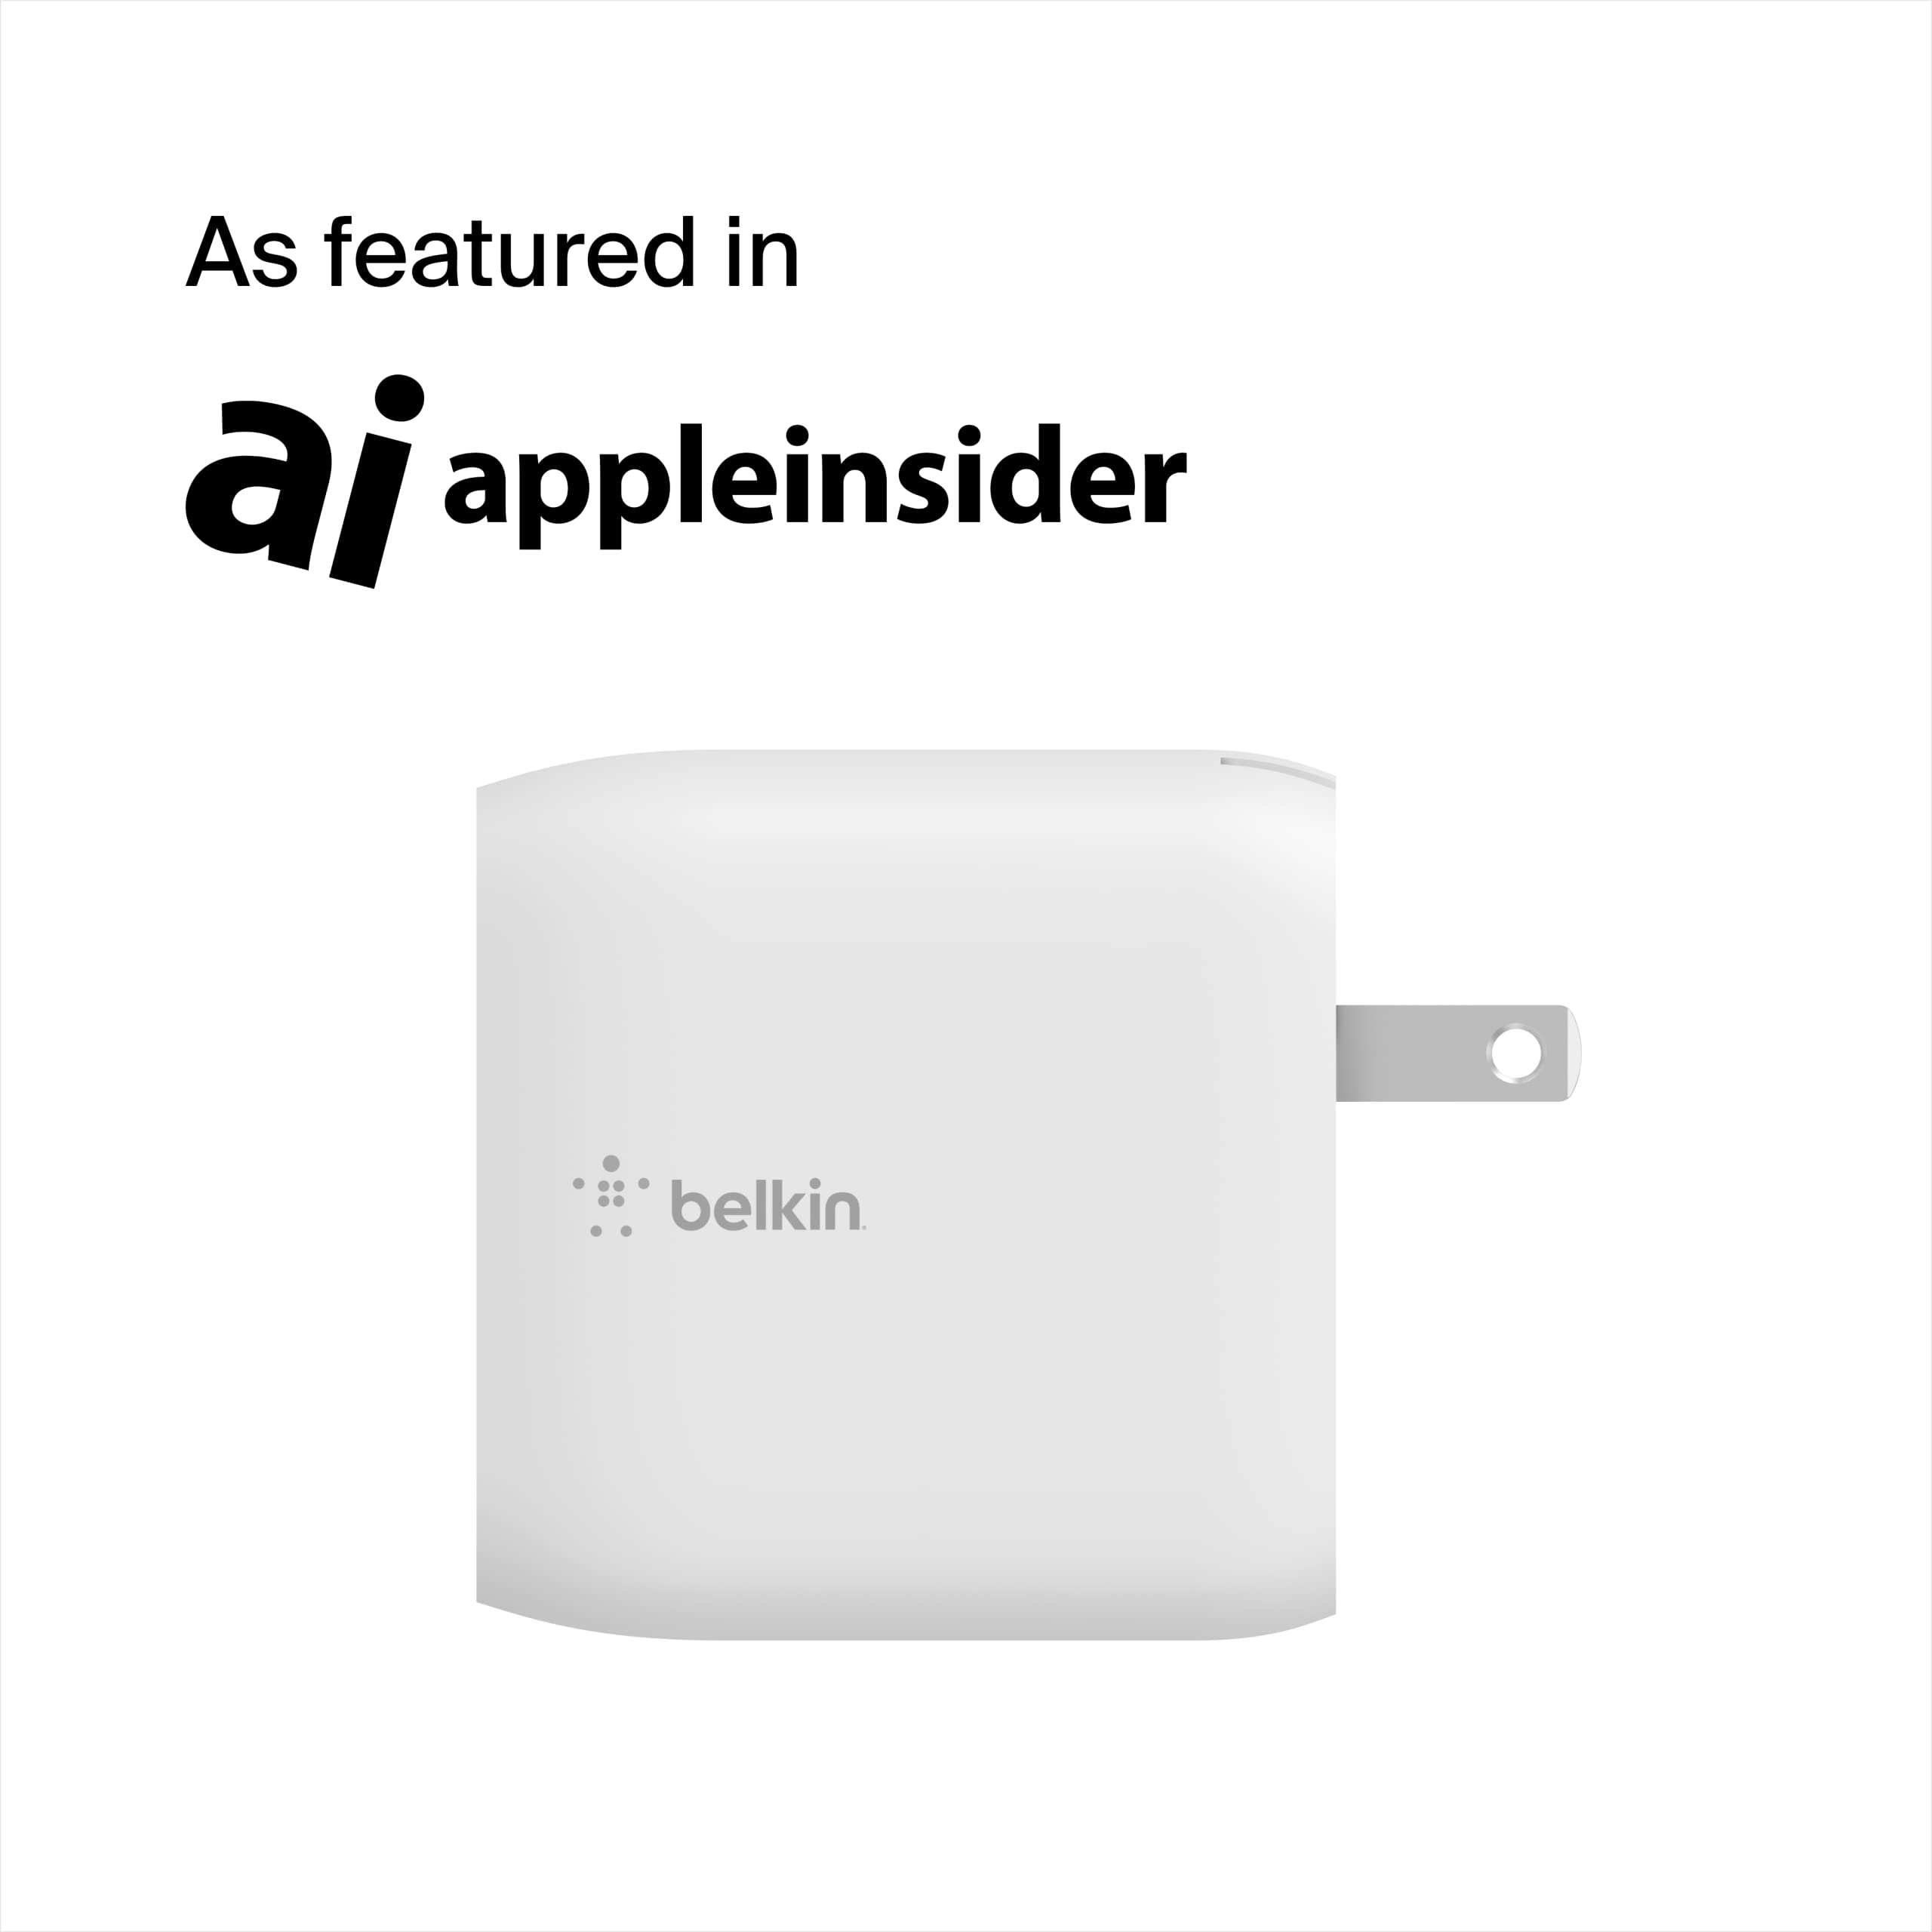 Belkin 40W Dual Port USB C Wall Charger - USB Type C Charger Fast Charging for iPhone 14, 14 Pro, 14 Pro Max, 13, 13 Pro, 13 Pro Max, Galaxy S21 Ultra, iPad, AirPods & More - USBC Charger (1-Pack)